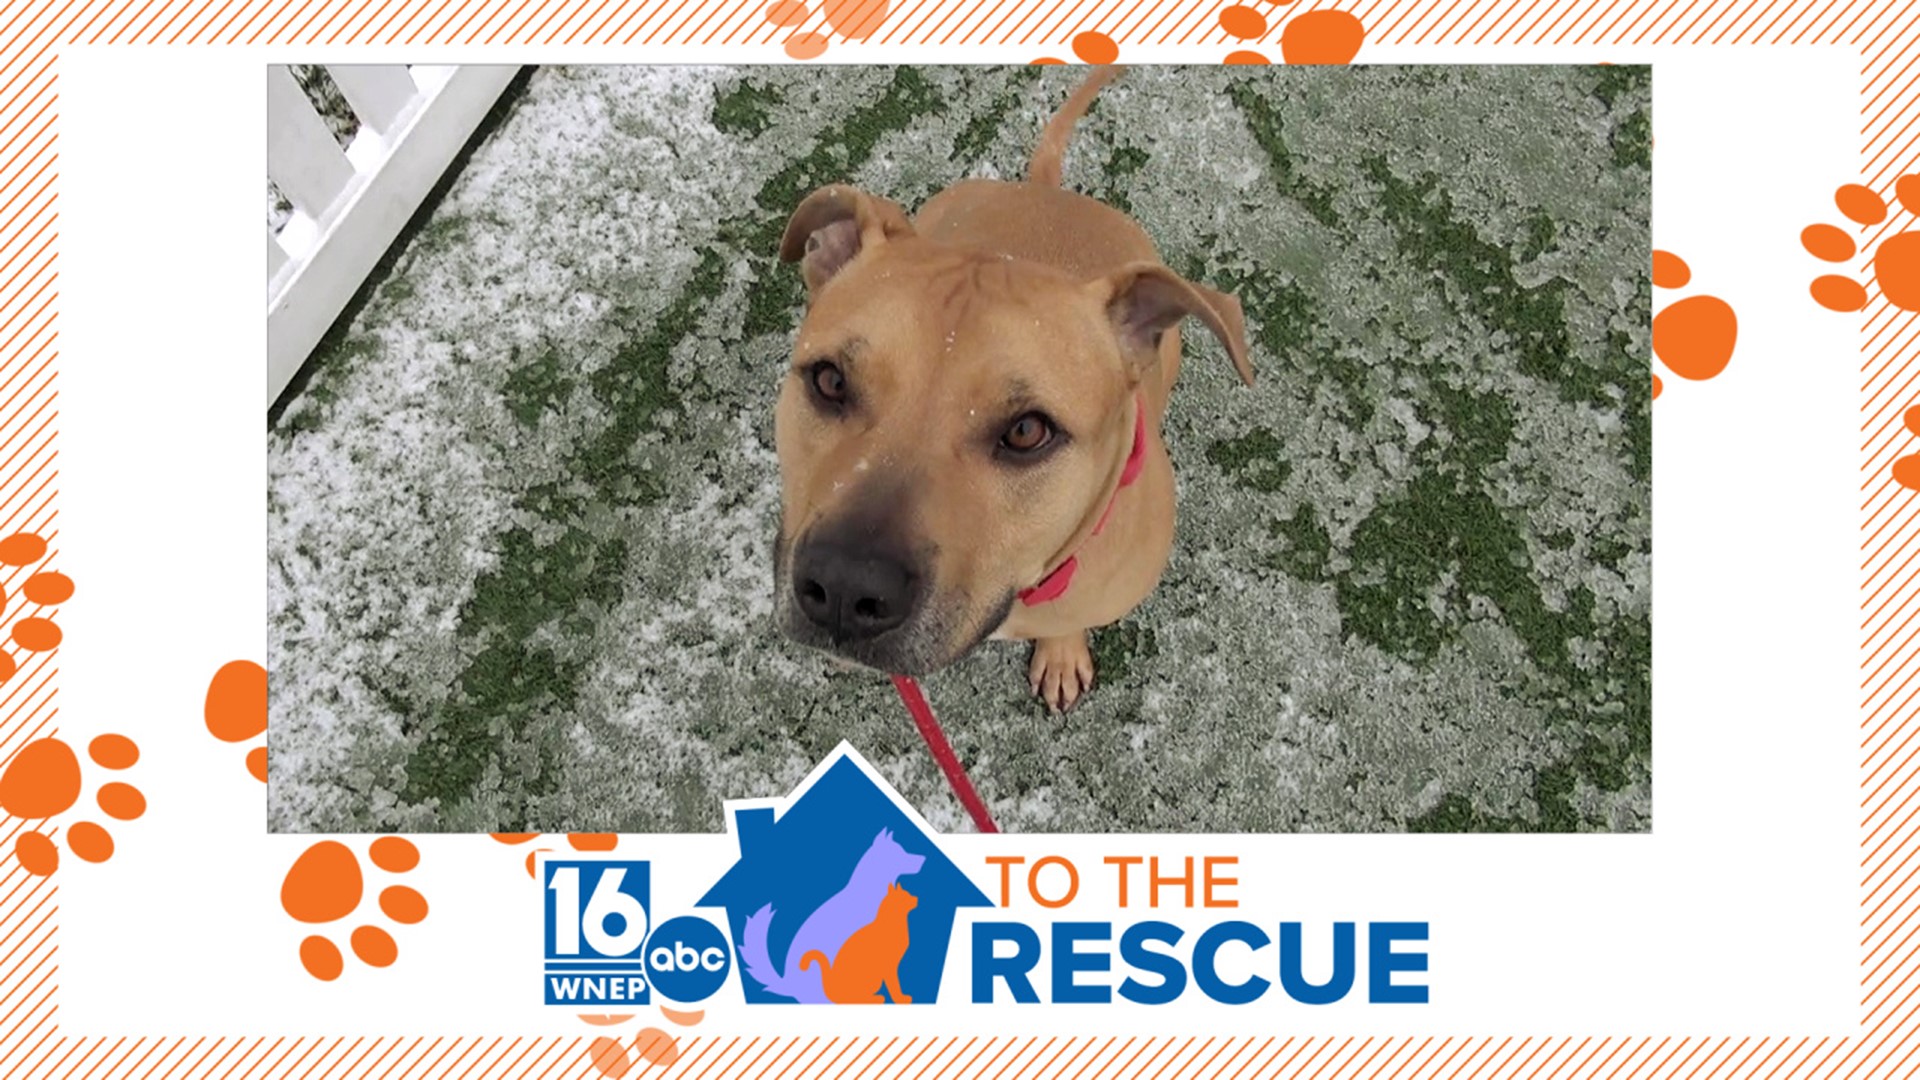 In this week's 16 To The Rescue, we check back in with an old friend. Billy was first featured in 2021 but still hasn't found his forever home.